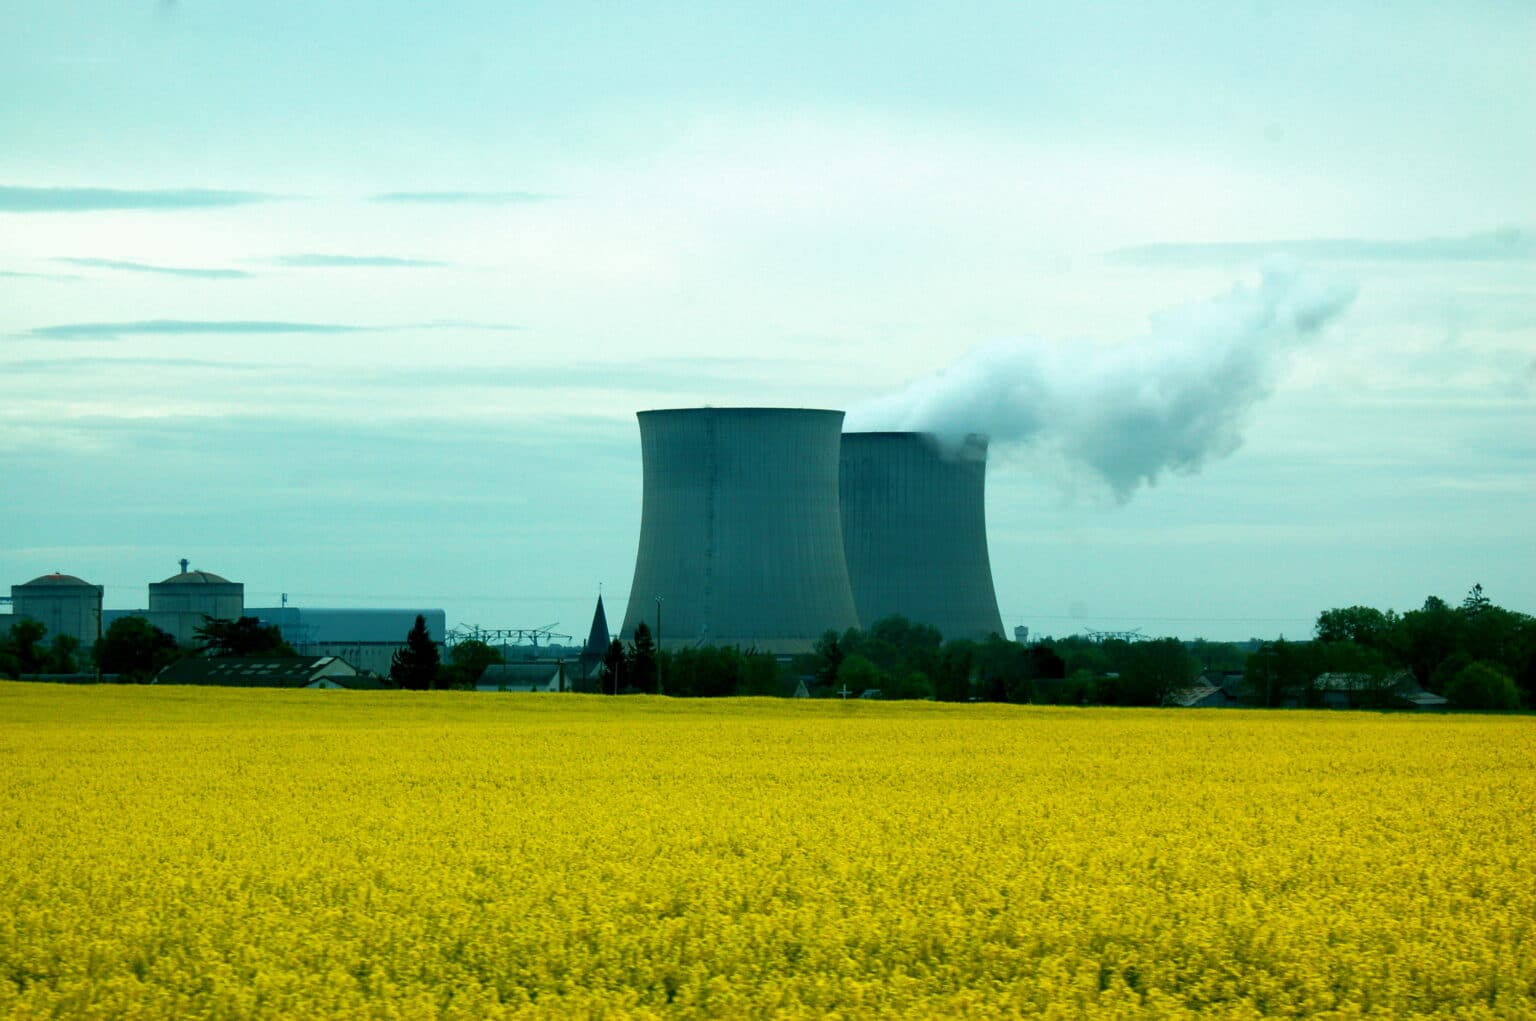 A nuclear power plant is surrounded by a field of yellow mustard flowers outside Paris, France.